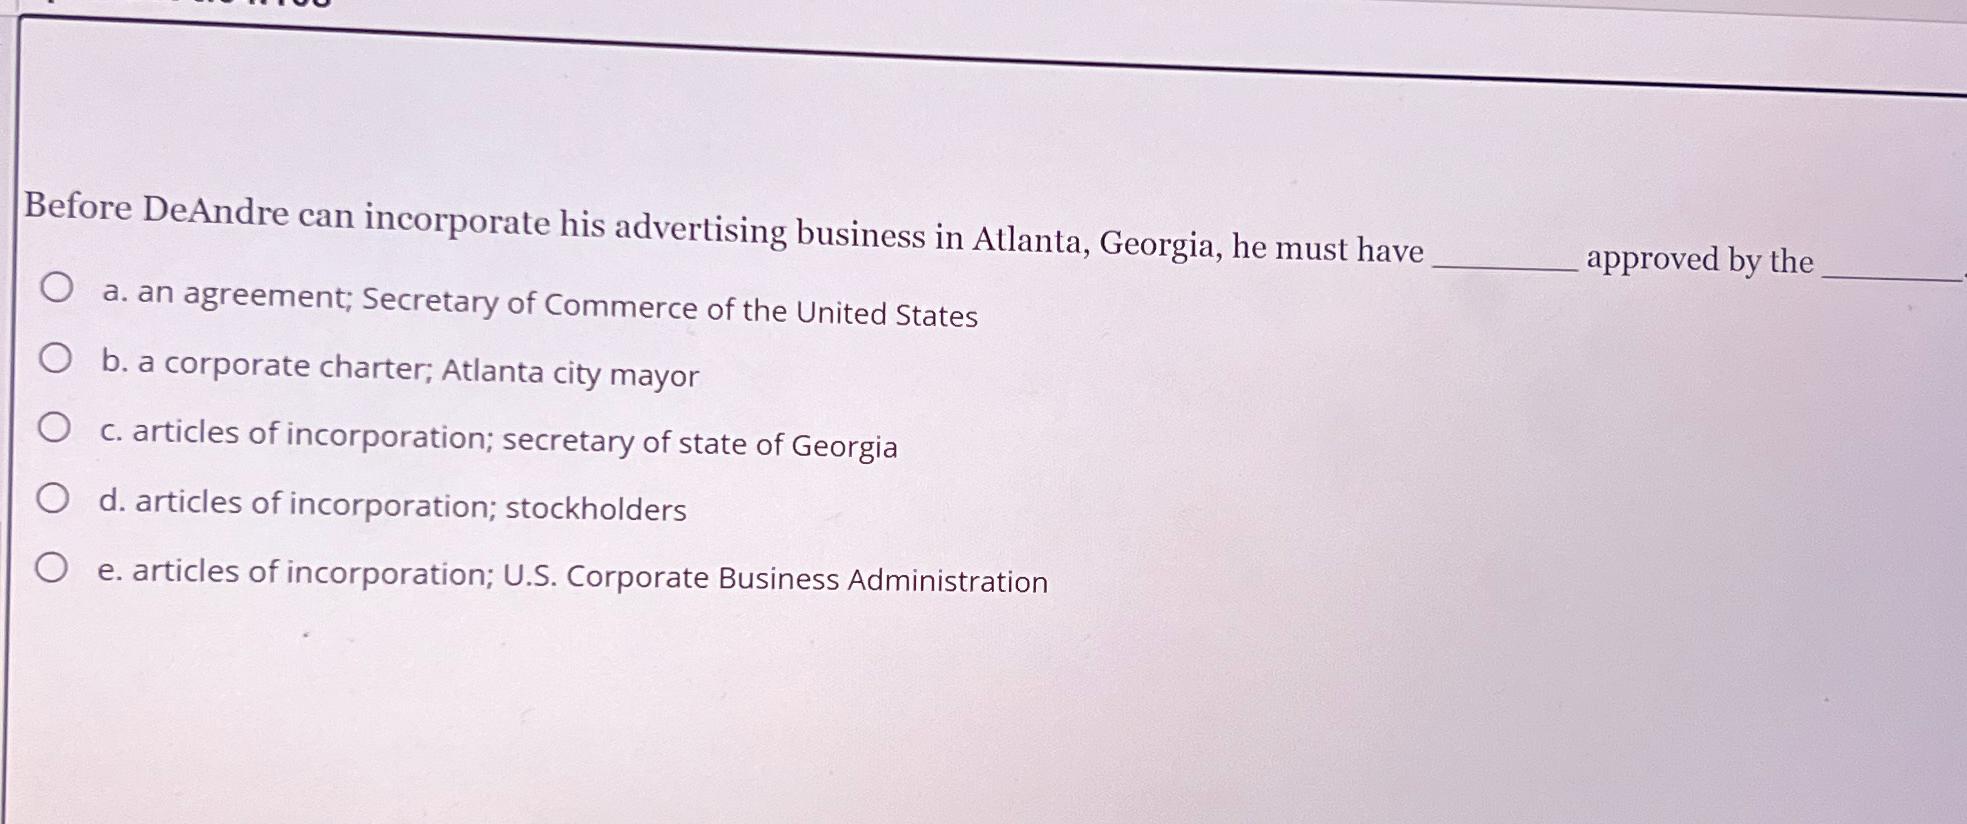 Before DeAndre can incorporate his advertising business in Atlanta, Georgia, he must have a. an agreement;